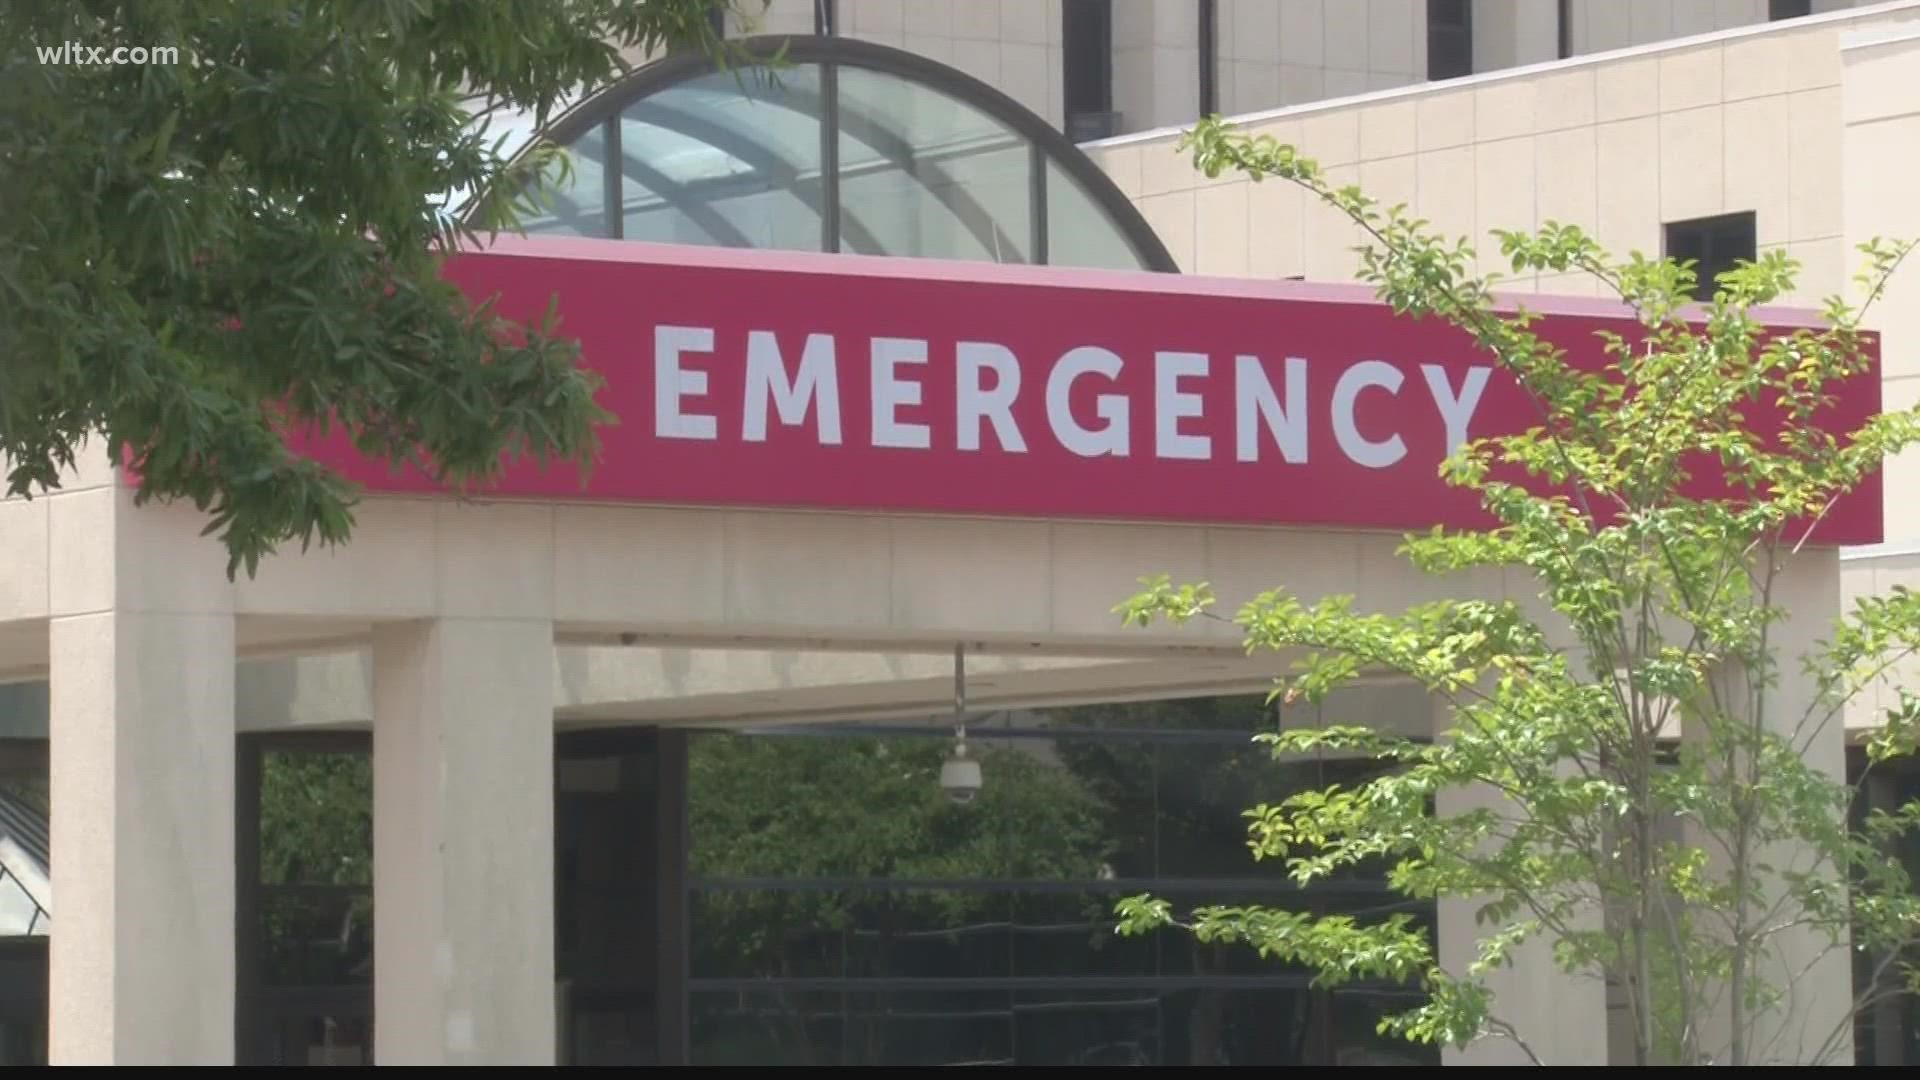 As COVID-19 cases continue to rise, hospitals in the Midlands are fighting to keep up with growing hospitalization numbers.